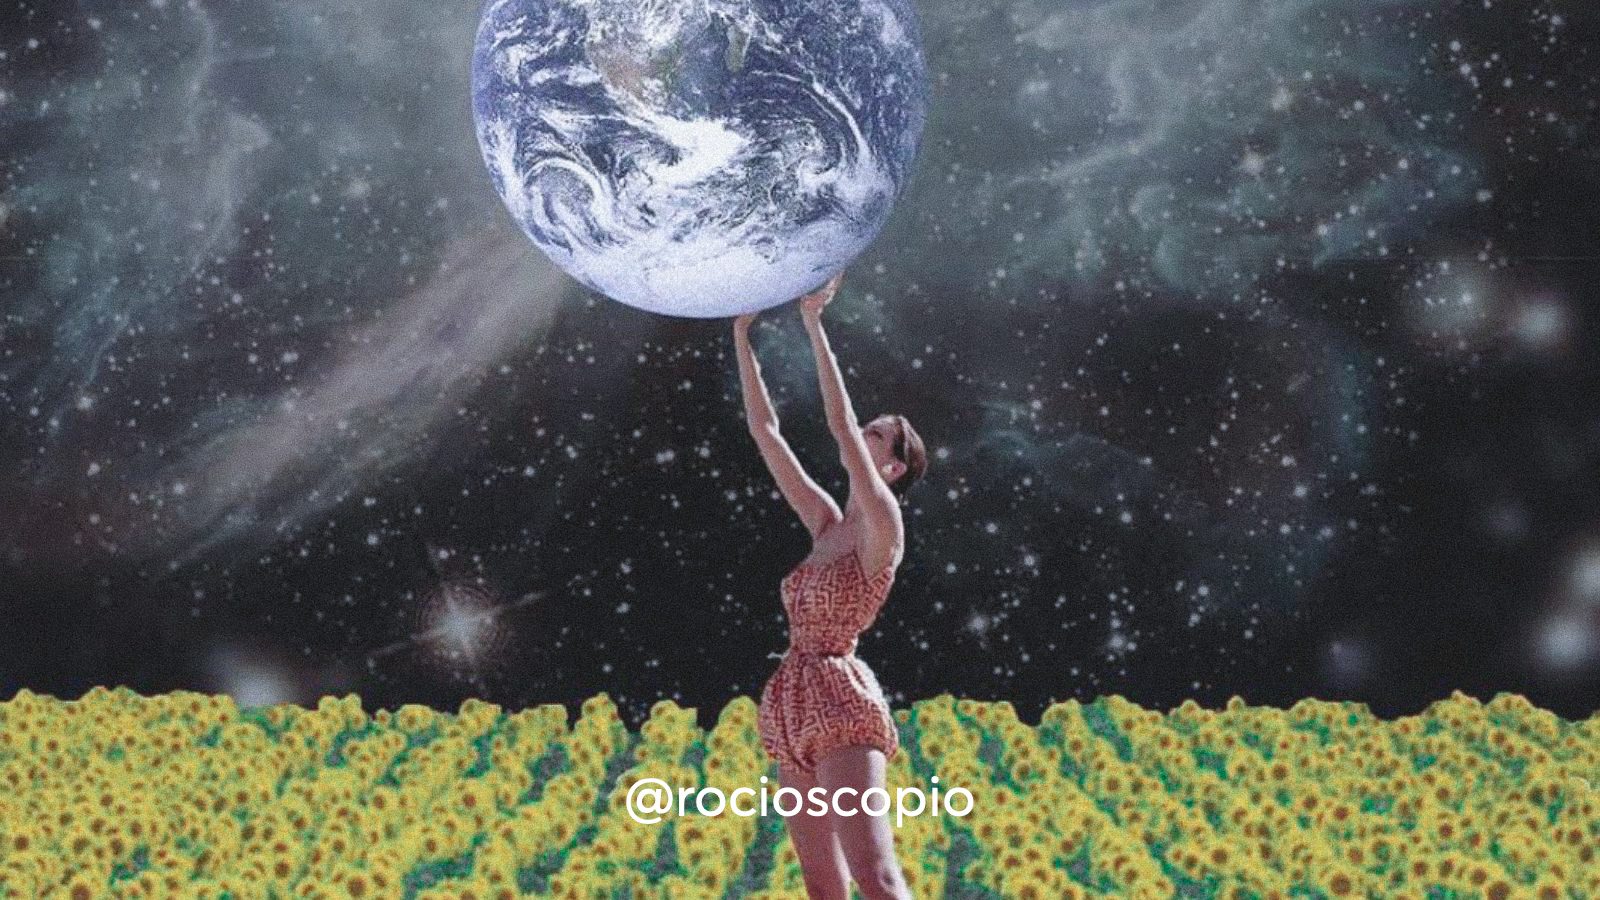 A collage art of a woman holding the earth up to the sky, surrounded by sunflowers.